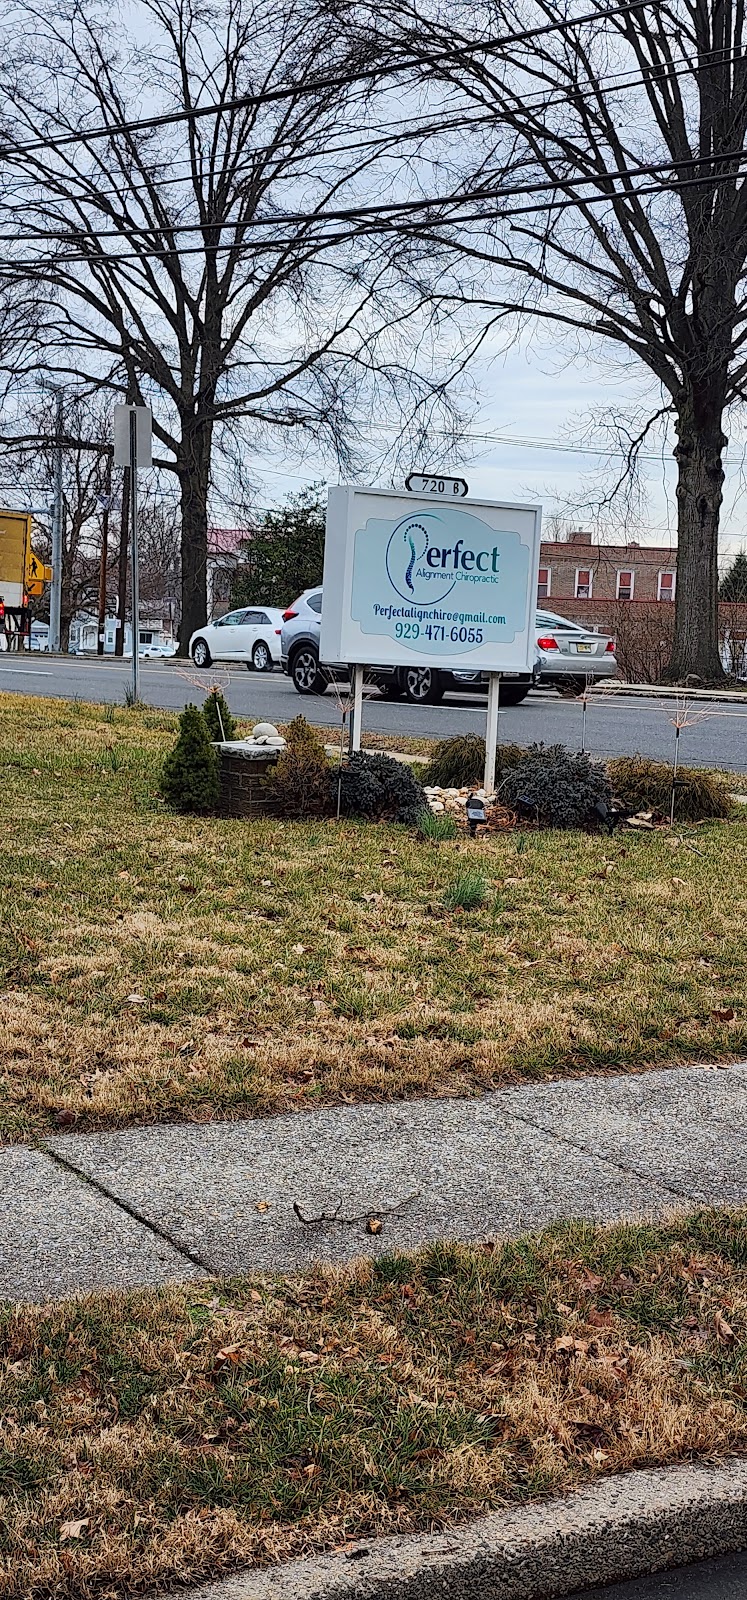 Perfect Alignment Chiropractic | 720 St Georges Ave, Rahway, NJ 07065 | Phone: (973) 908-8689